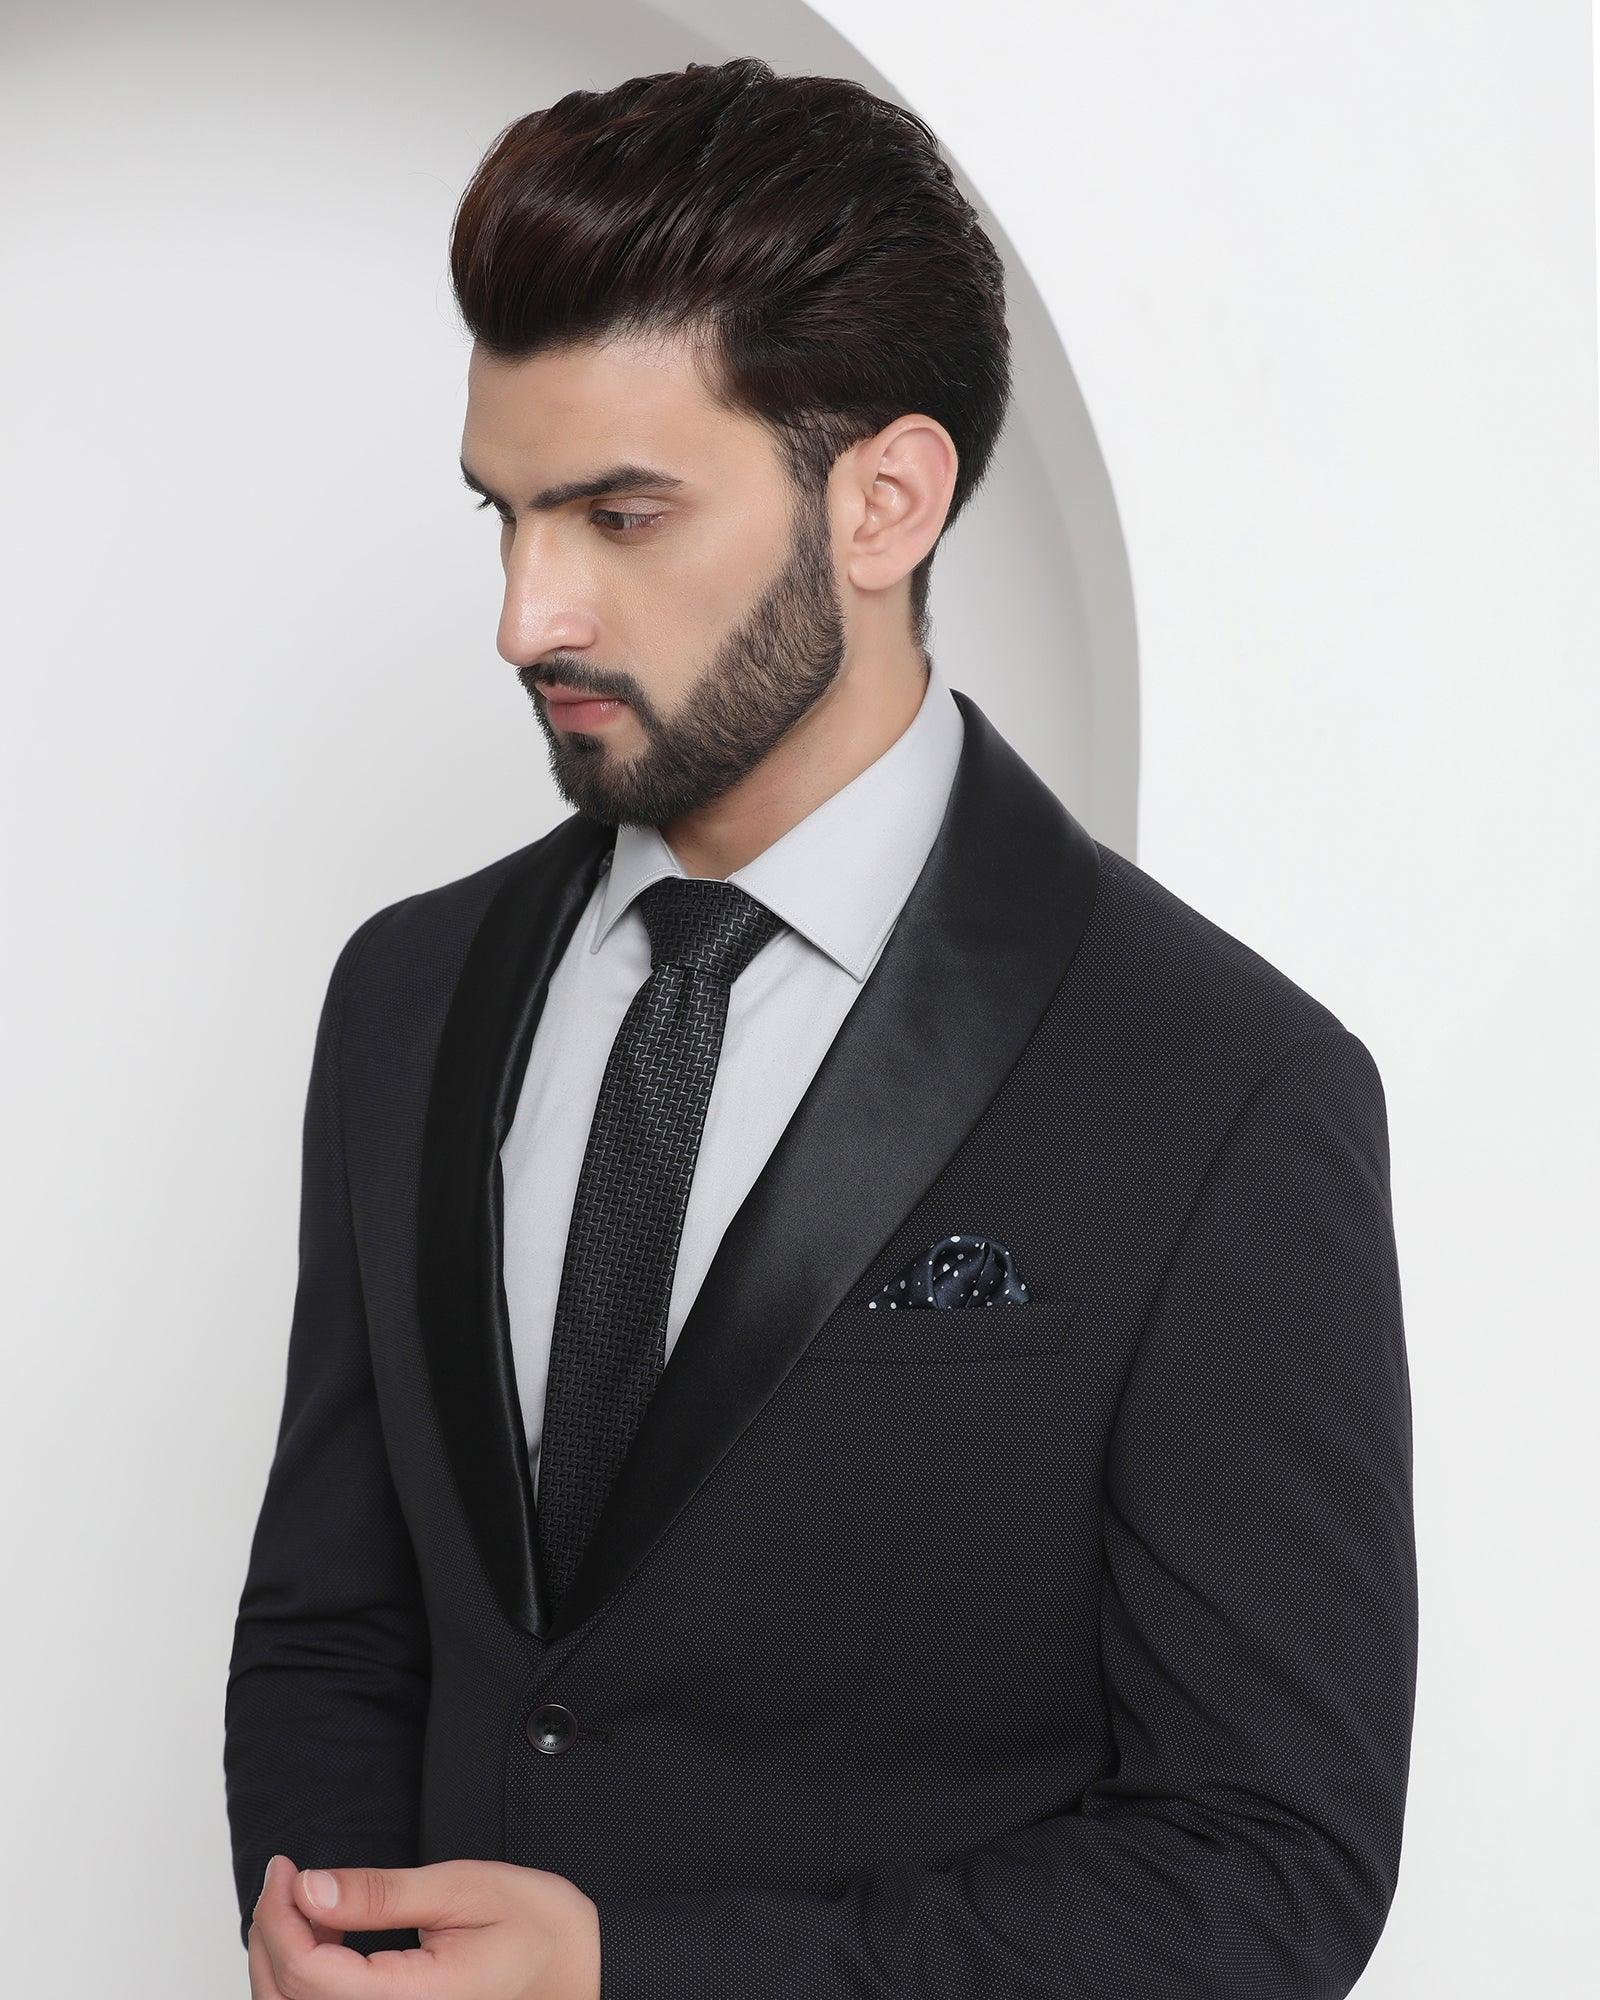 Tuxedo Two Piece Black Textured Formal Suit - Thames